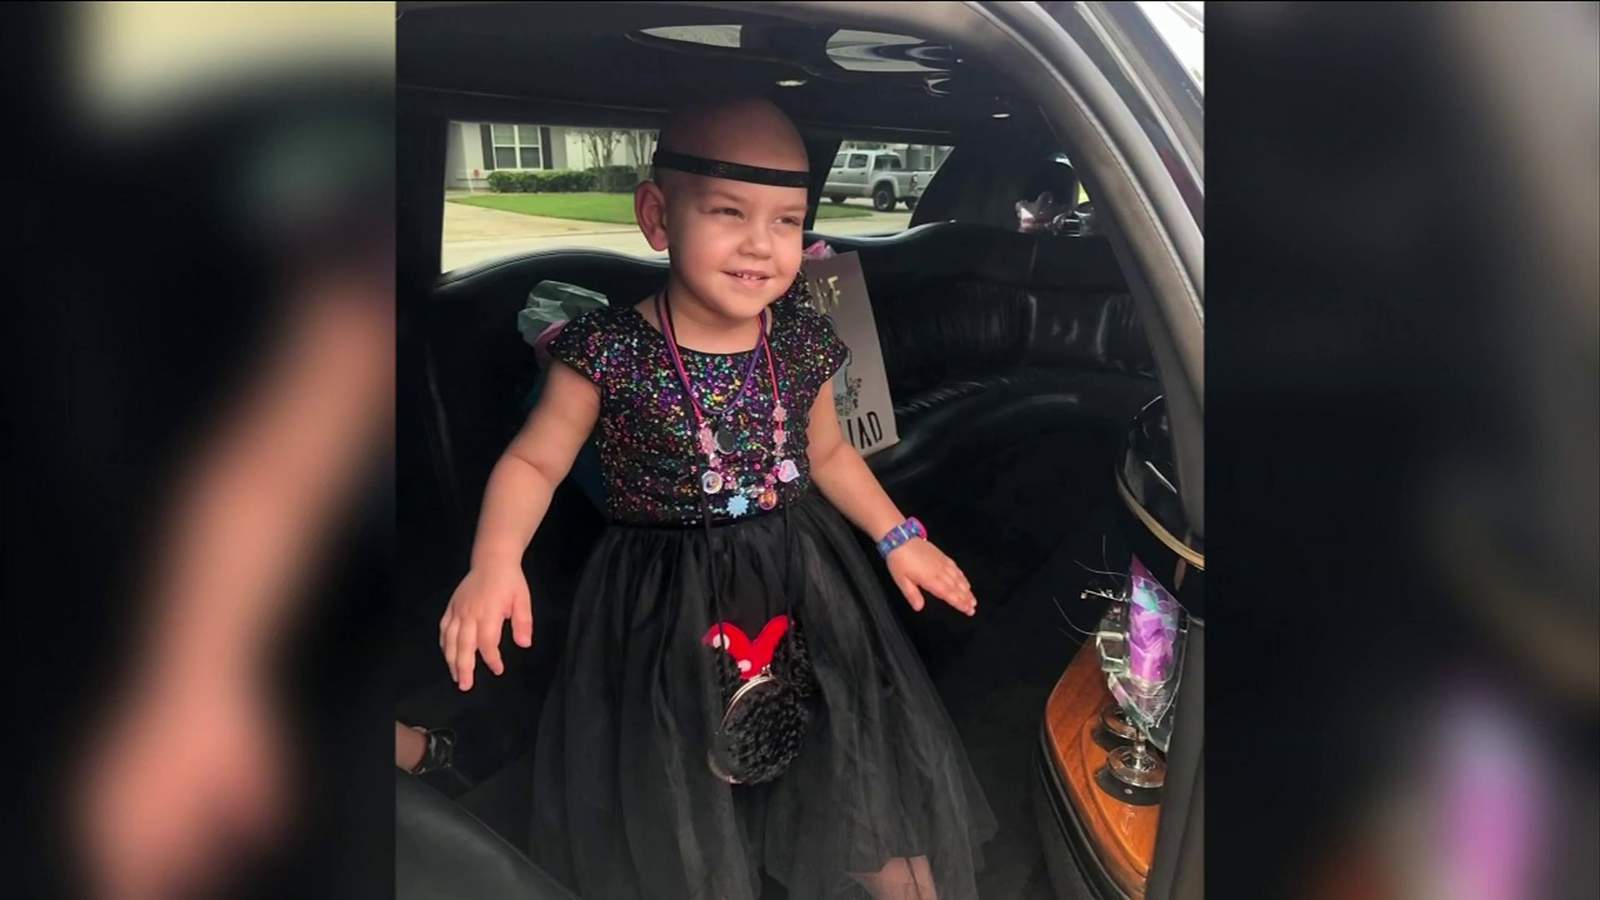 4-year-old battling leukemia, generous older sister, treated to limo ride